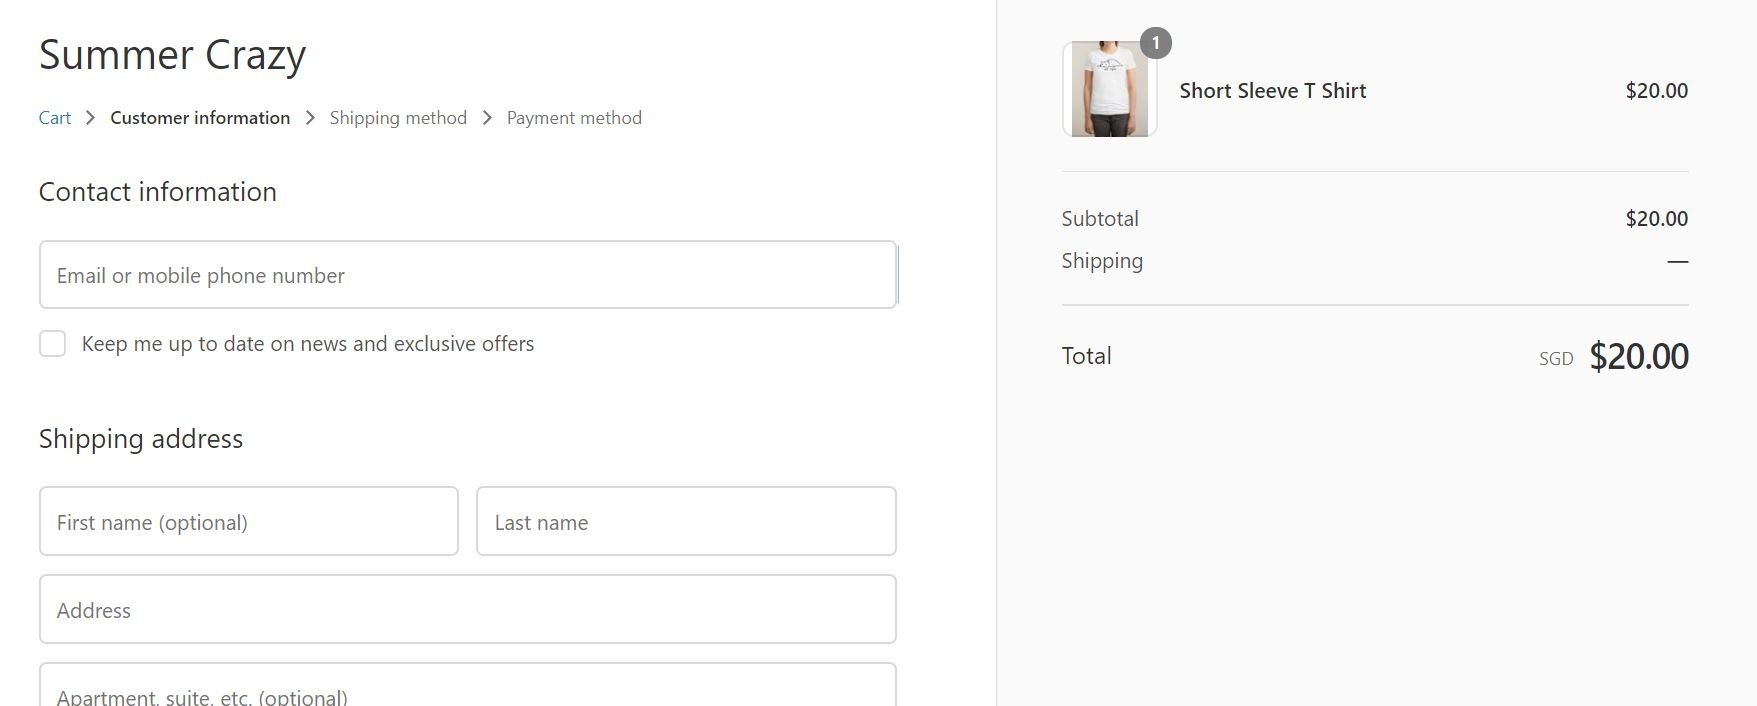 test-purchase-before-launch-shopify